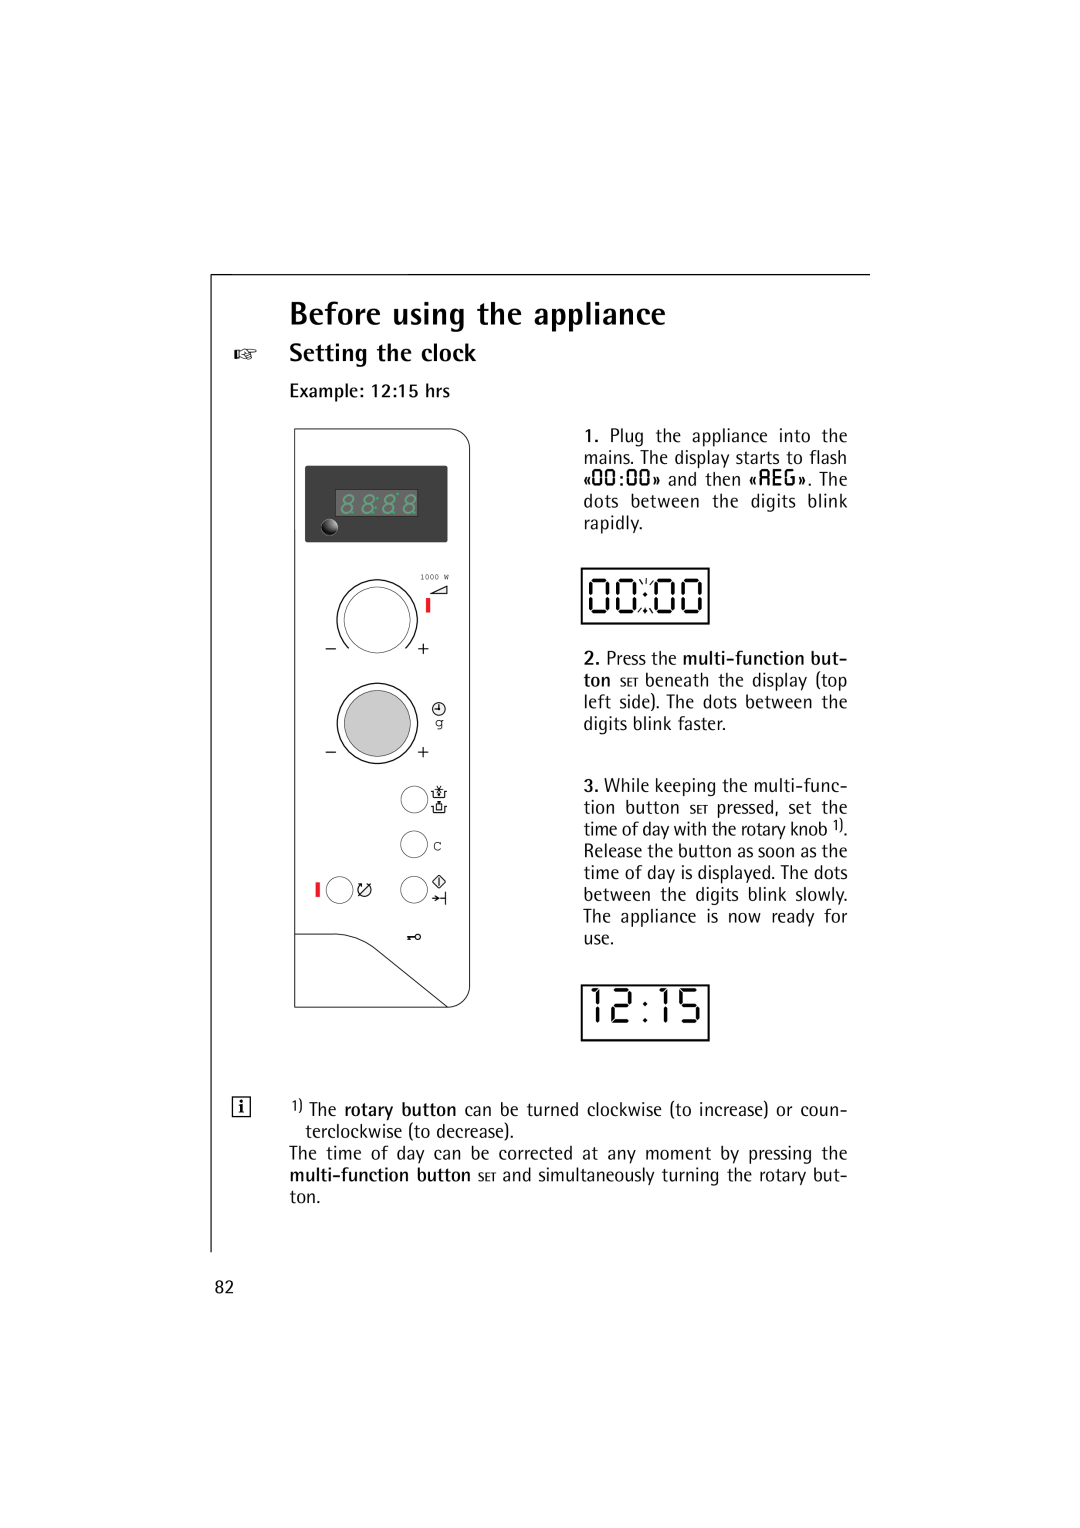 AEG 1231 E manual Before using the appliance, 8888, Setting the clock, Example 12 15 hrs 